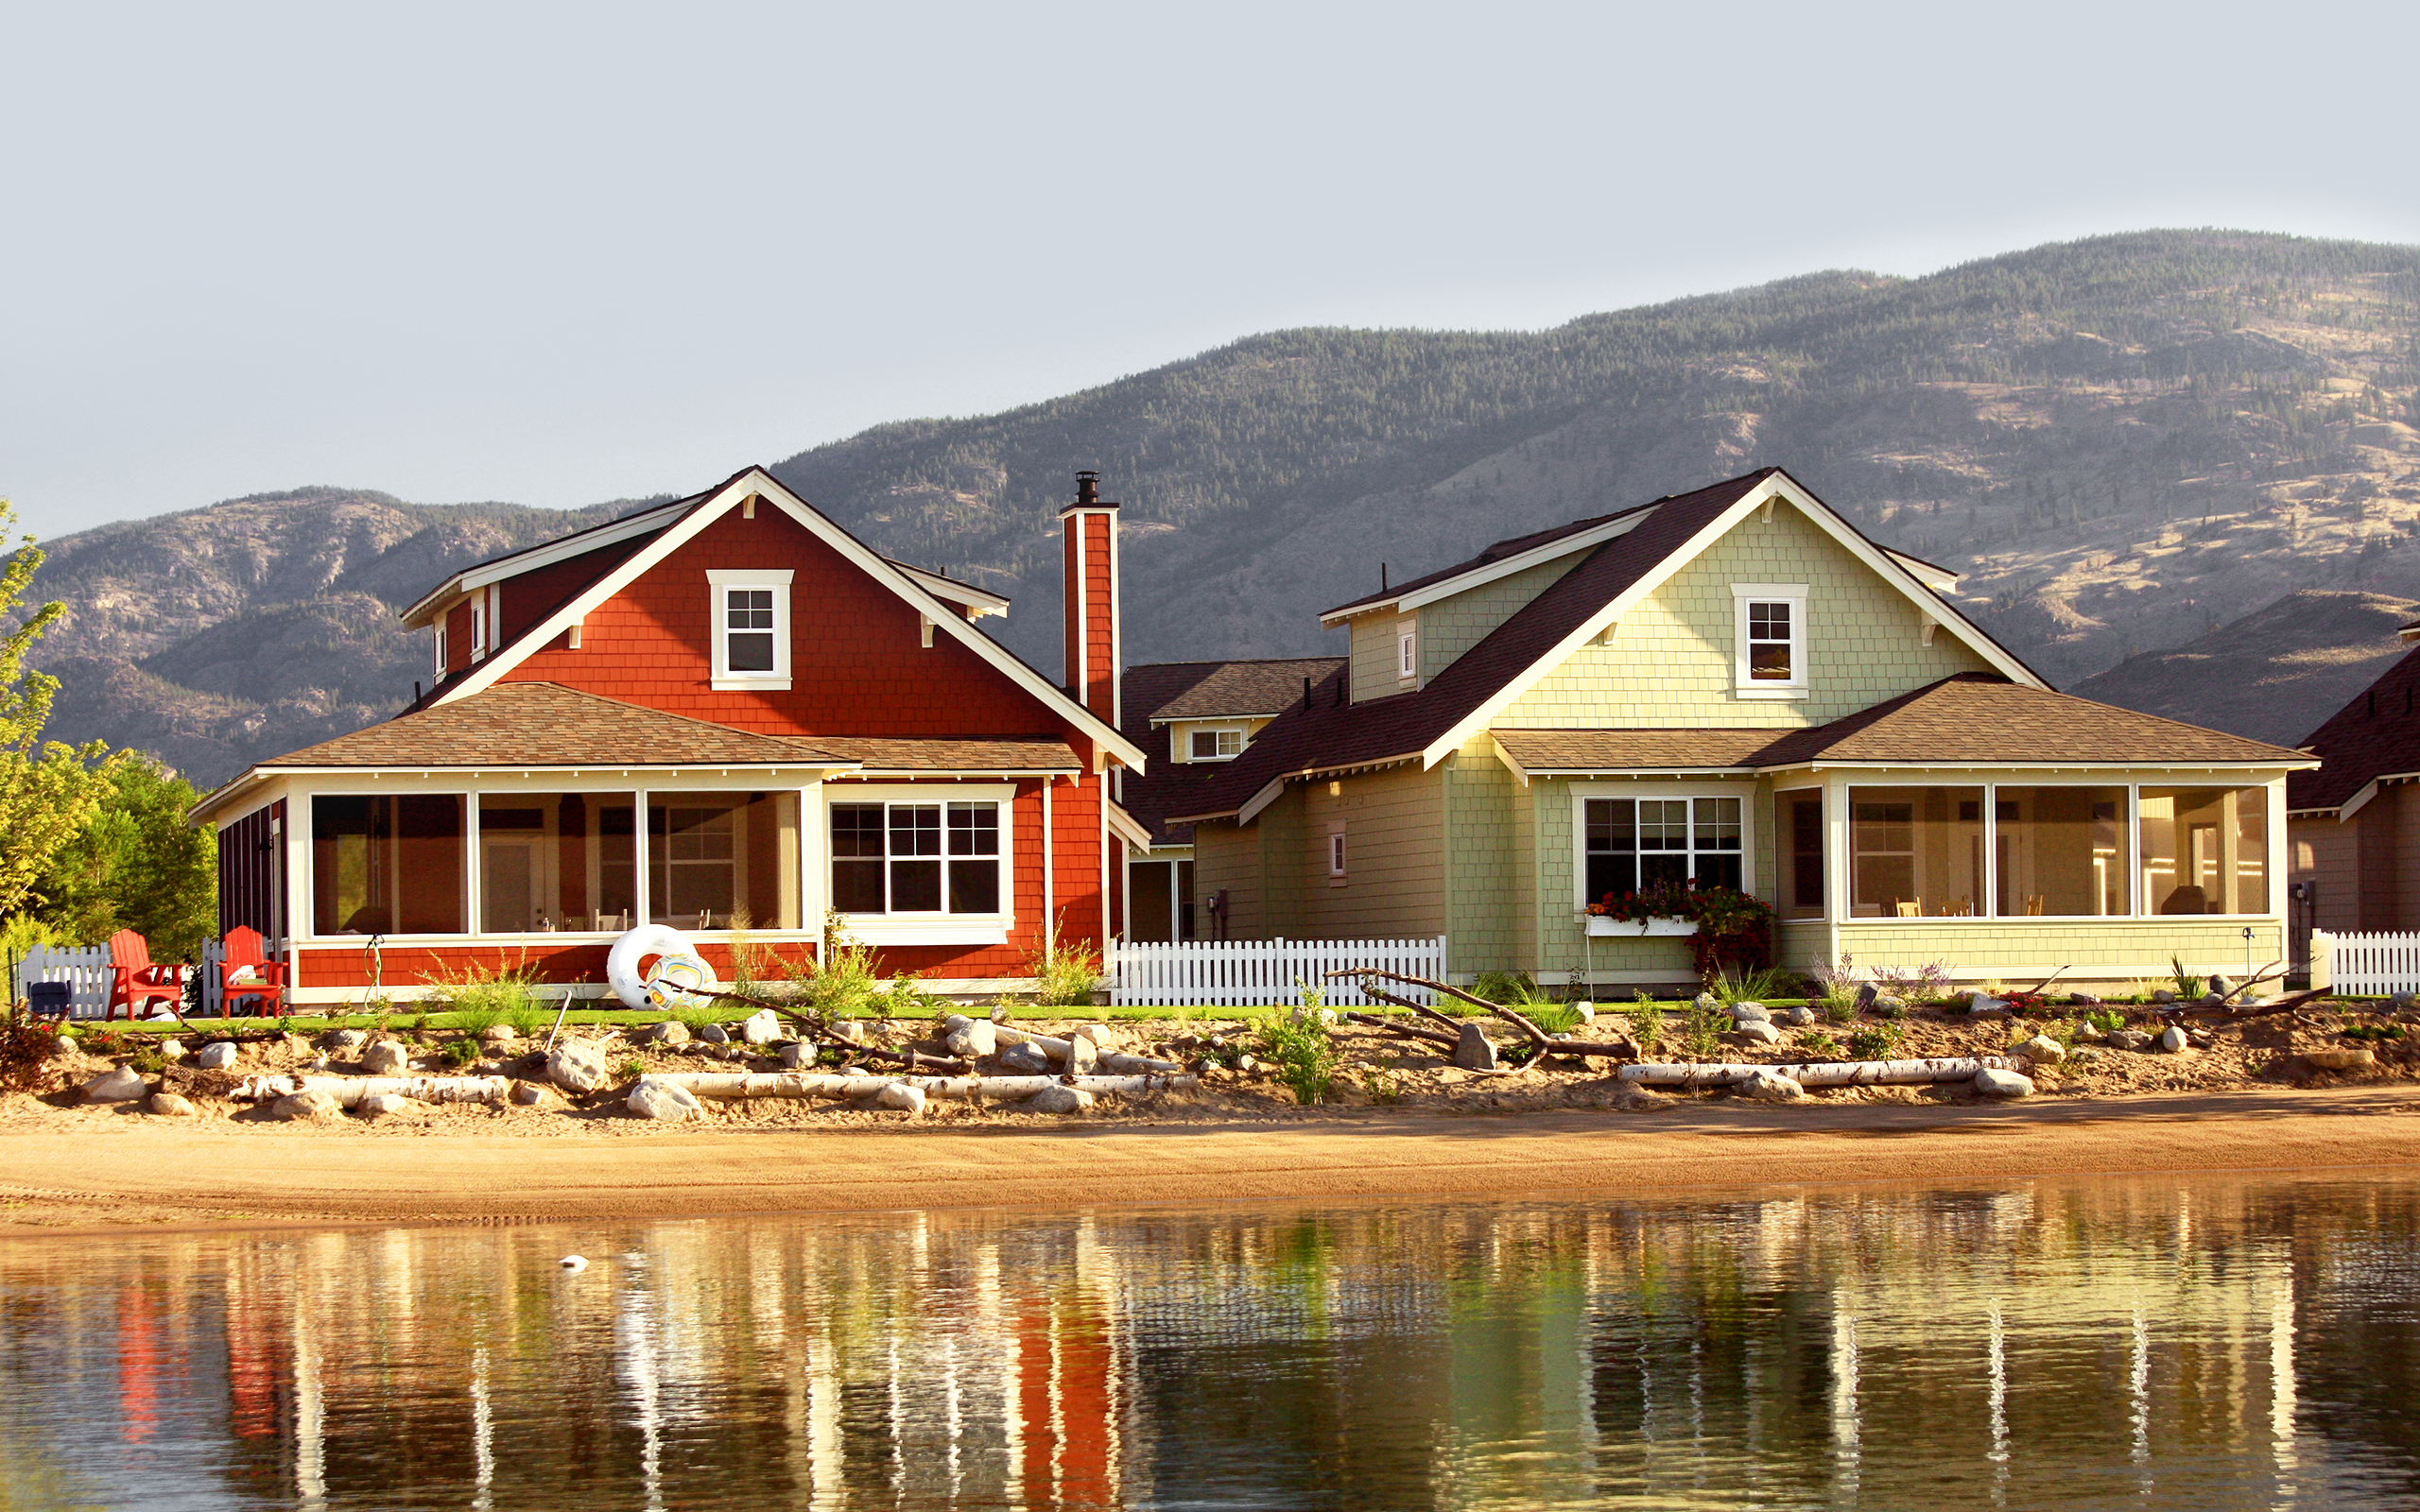 Beach houses on a waterfront.